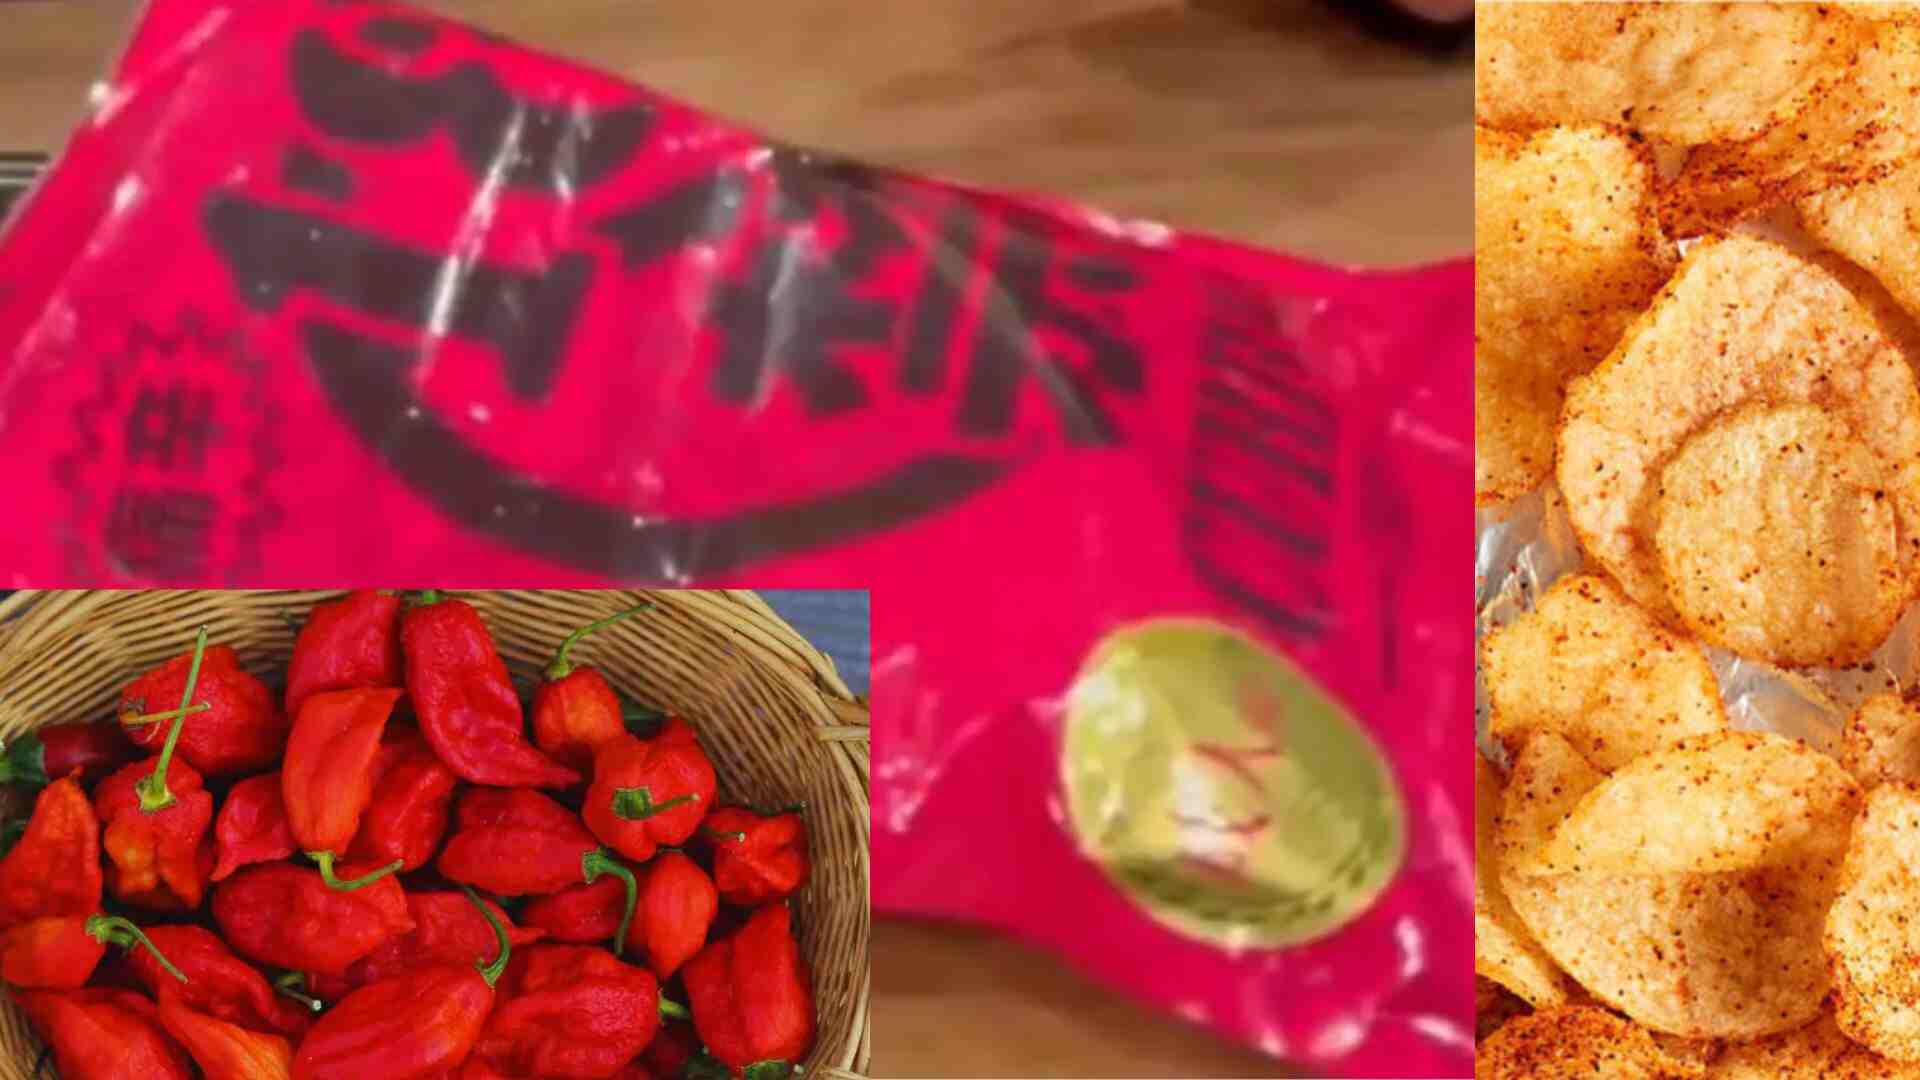 14 Japanese Students Hospitalized After Eating Ghost Pepper Chips